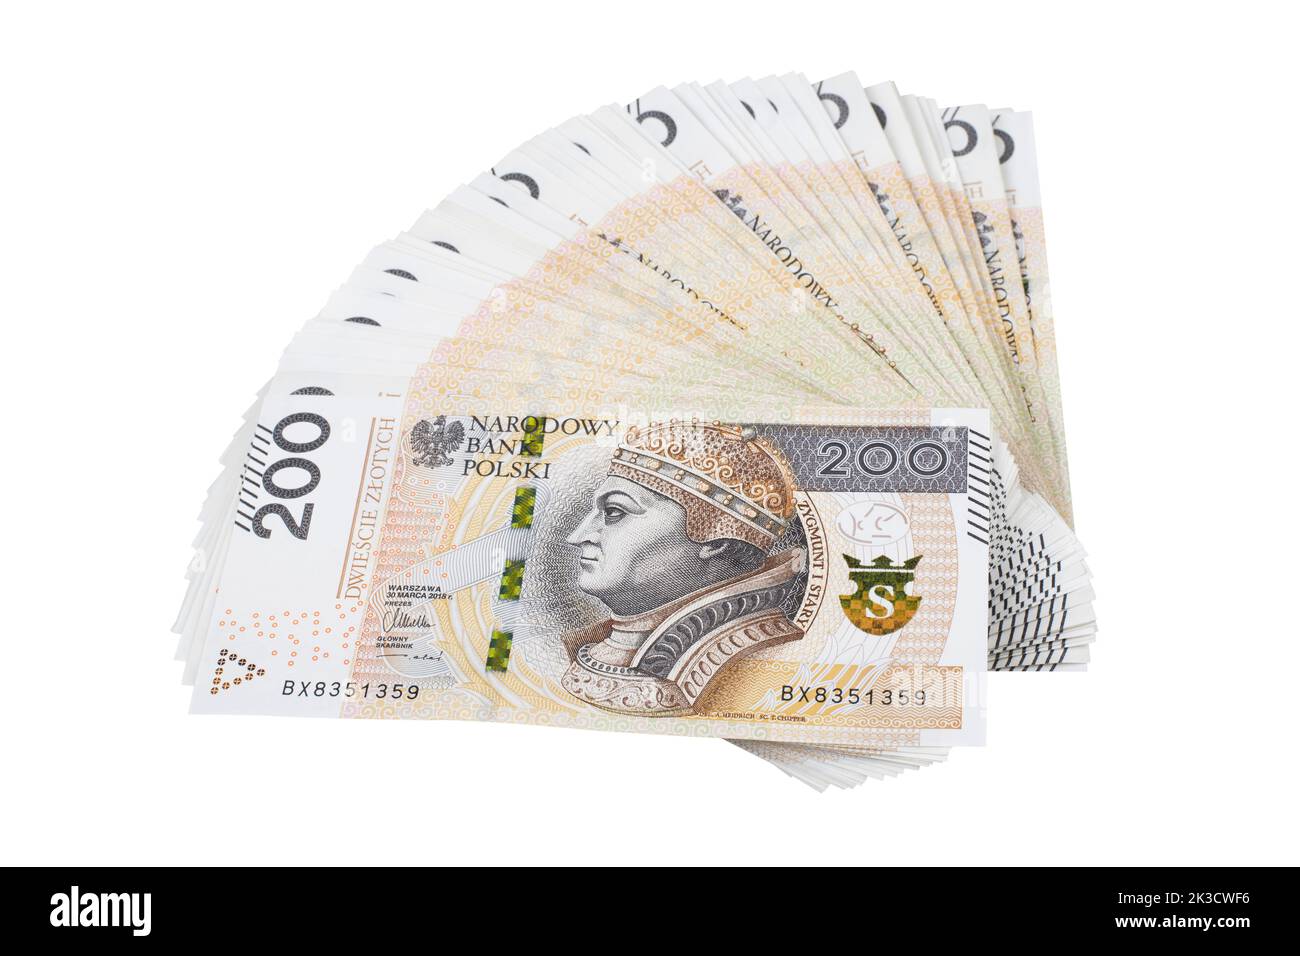 Bundle of polish 200 zloty banknotes. Isolated on white. Clipping Path included. Stock Photo